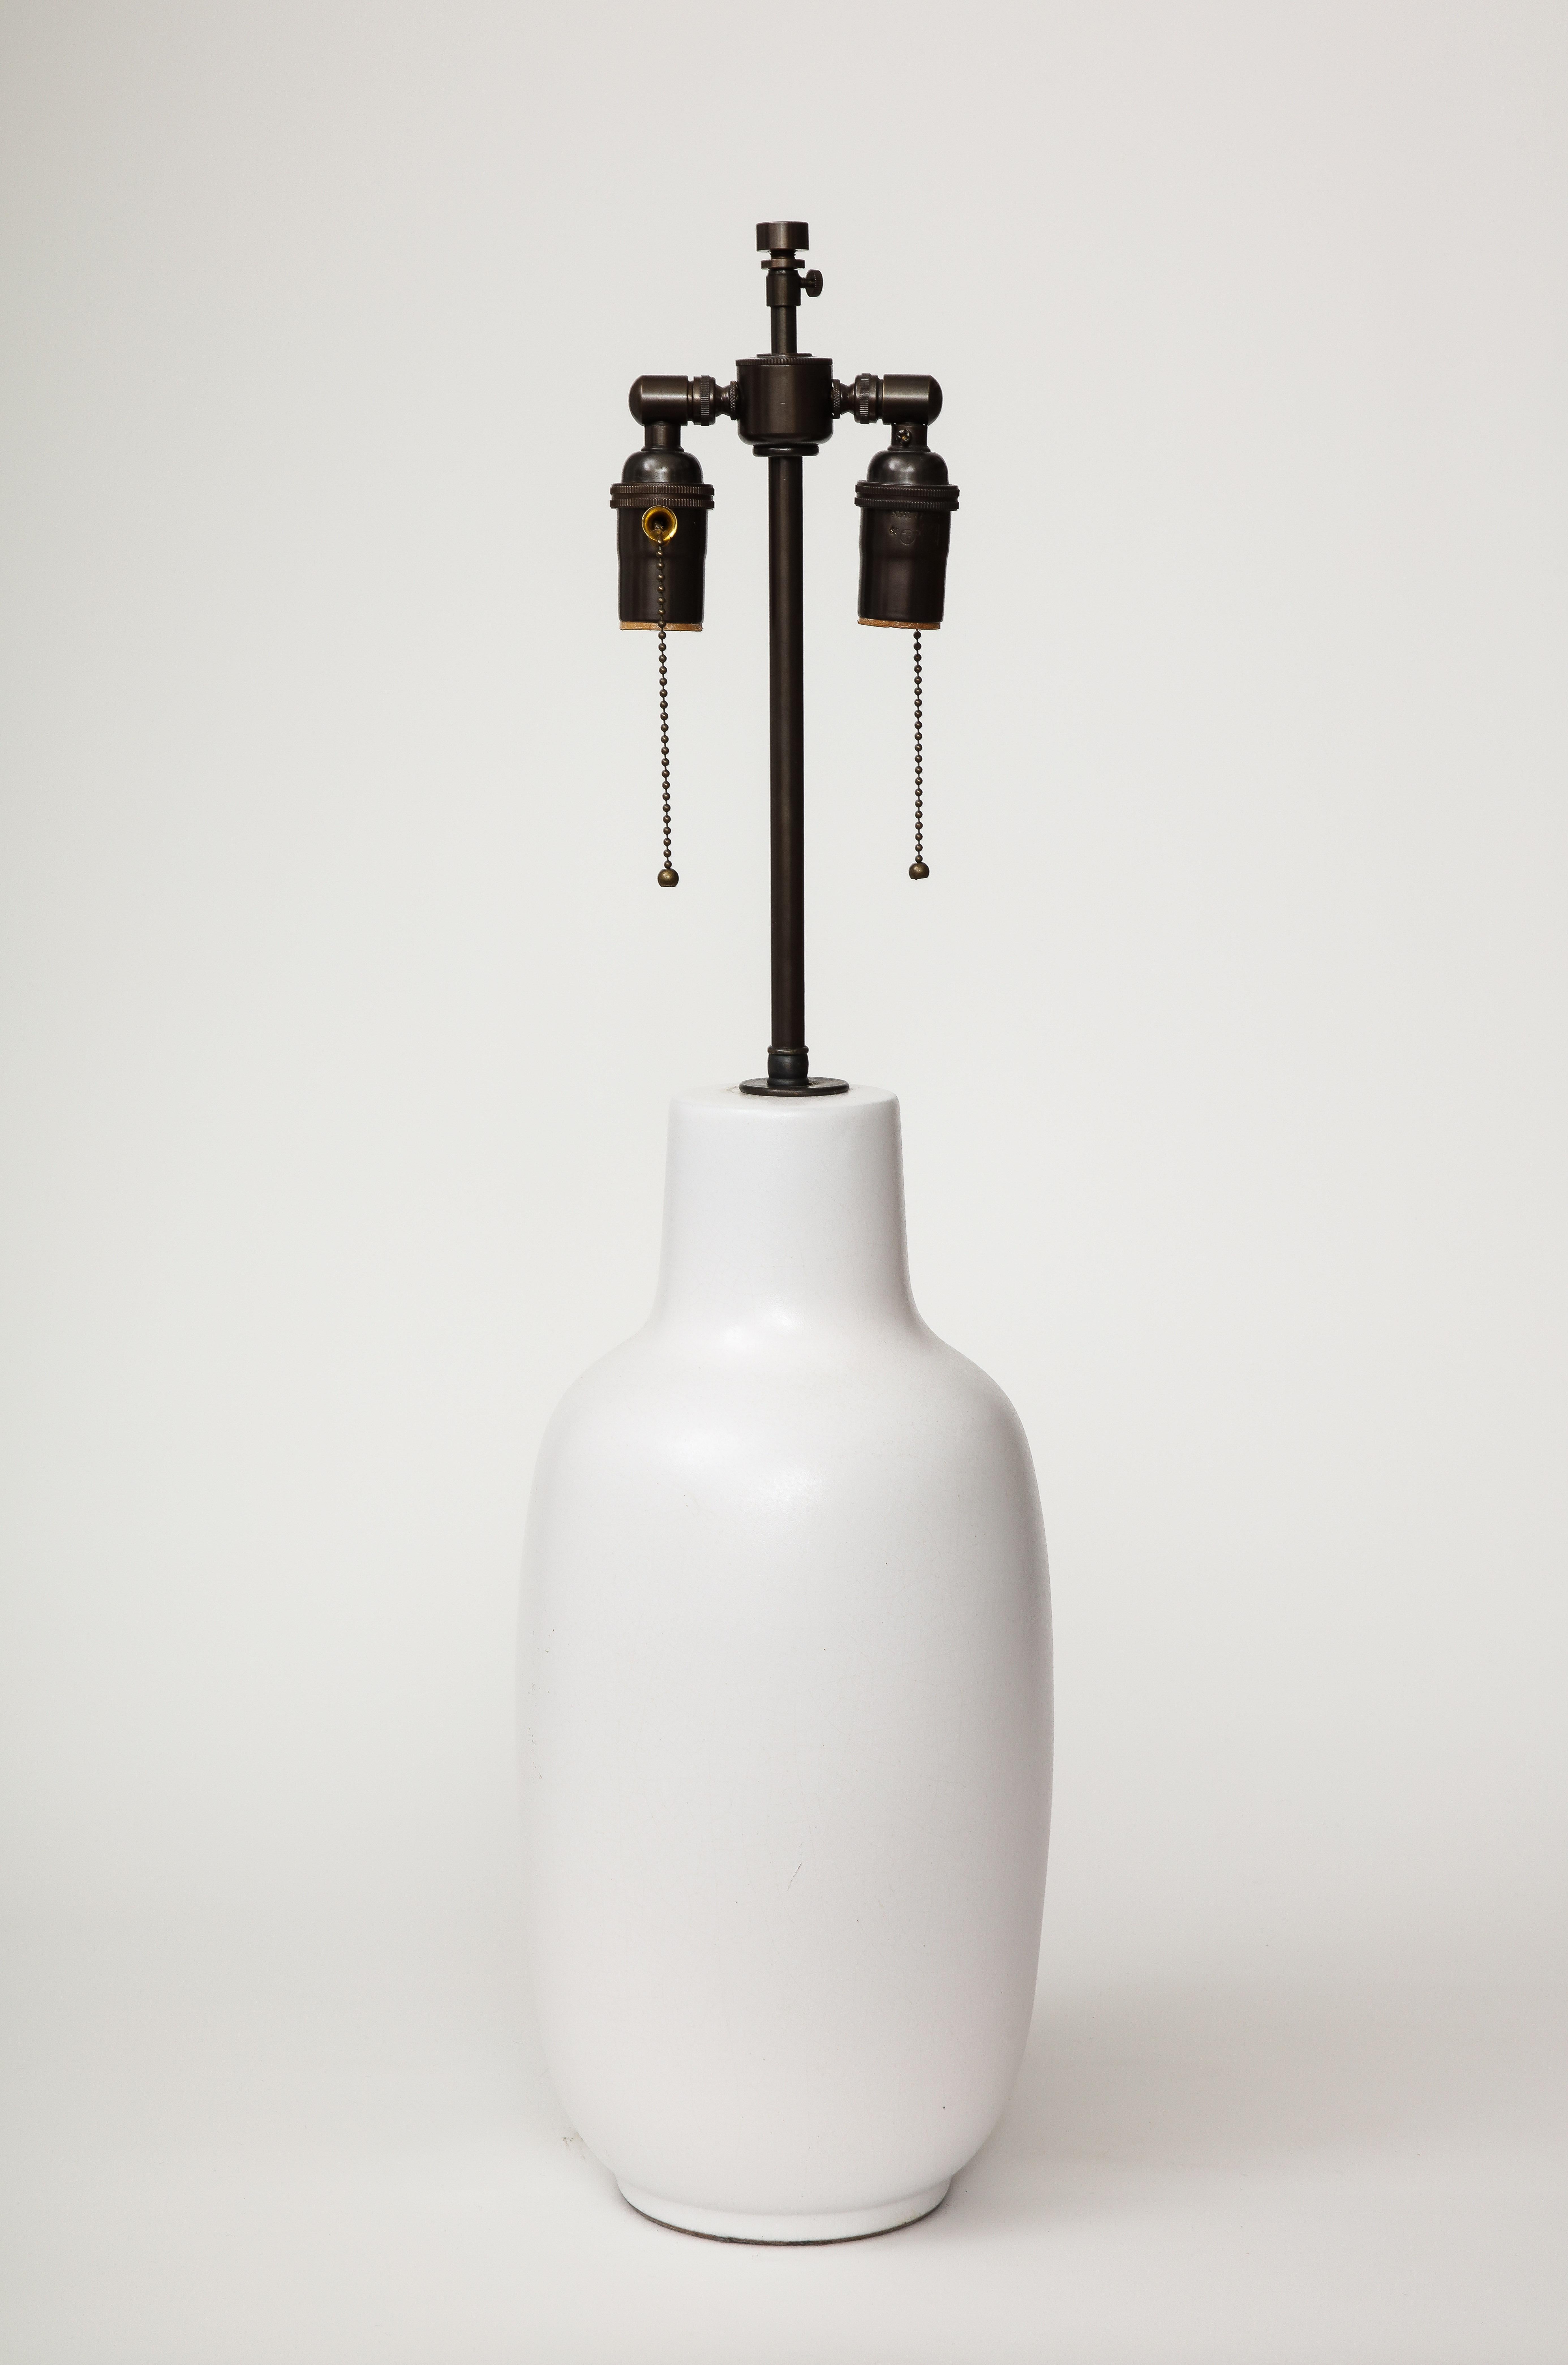 Mid-20th Century Glazed Ceramic Table Lamp by Design Technics, United States, c. 1960 For Sale